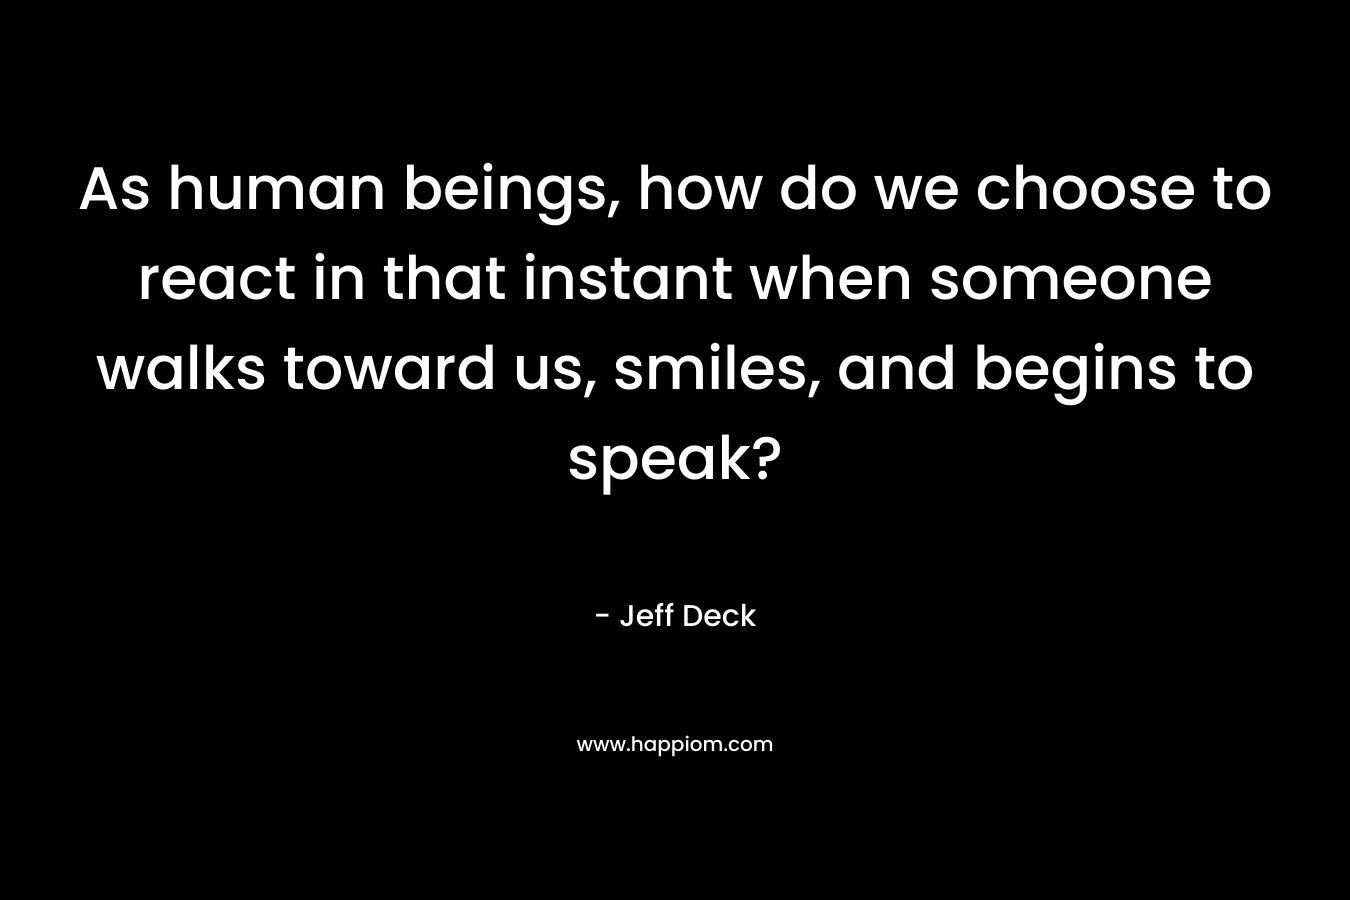 As human beings, how do we choose to react in that instant when someone walks toward us, smiles, and begins to speak?